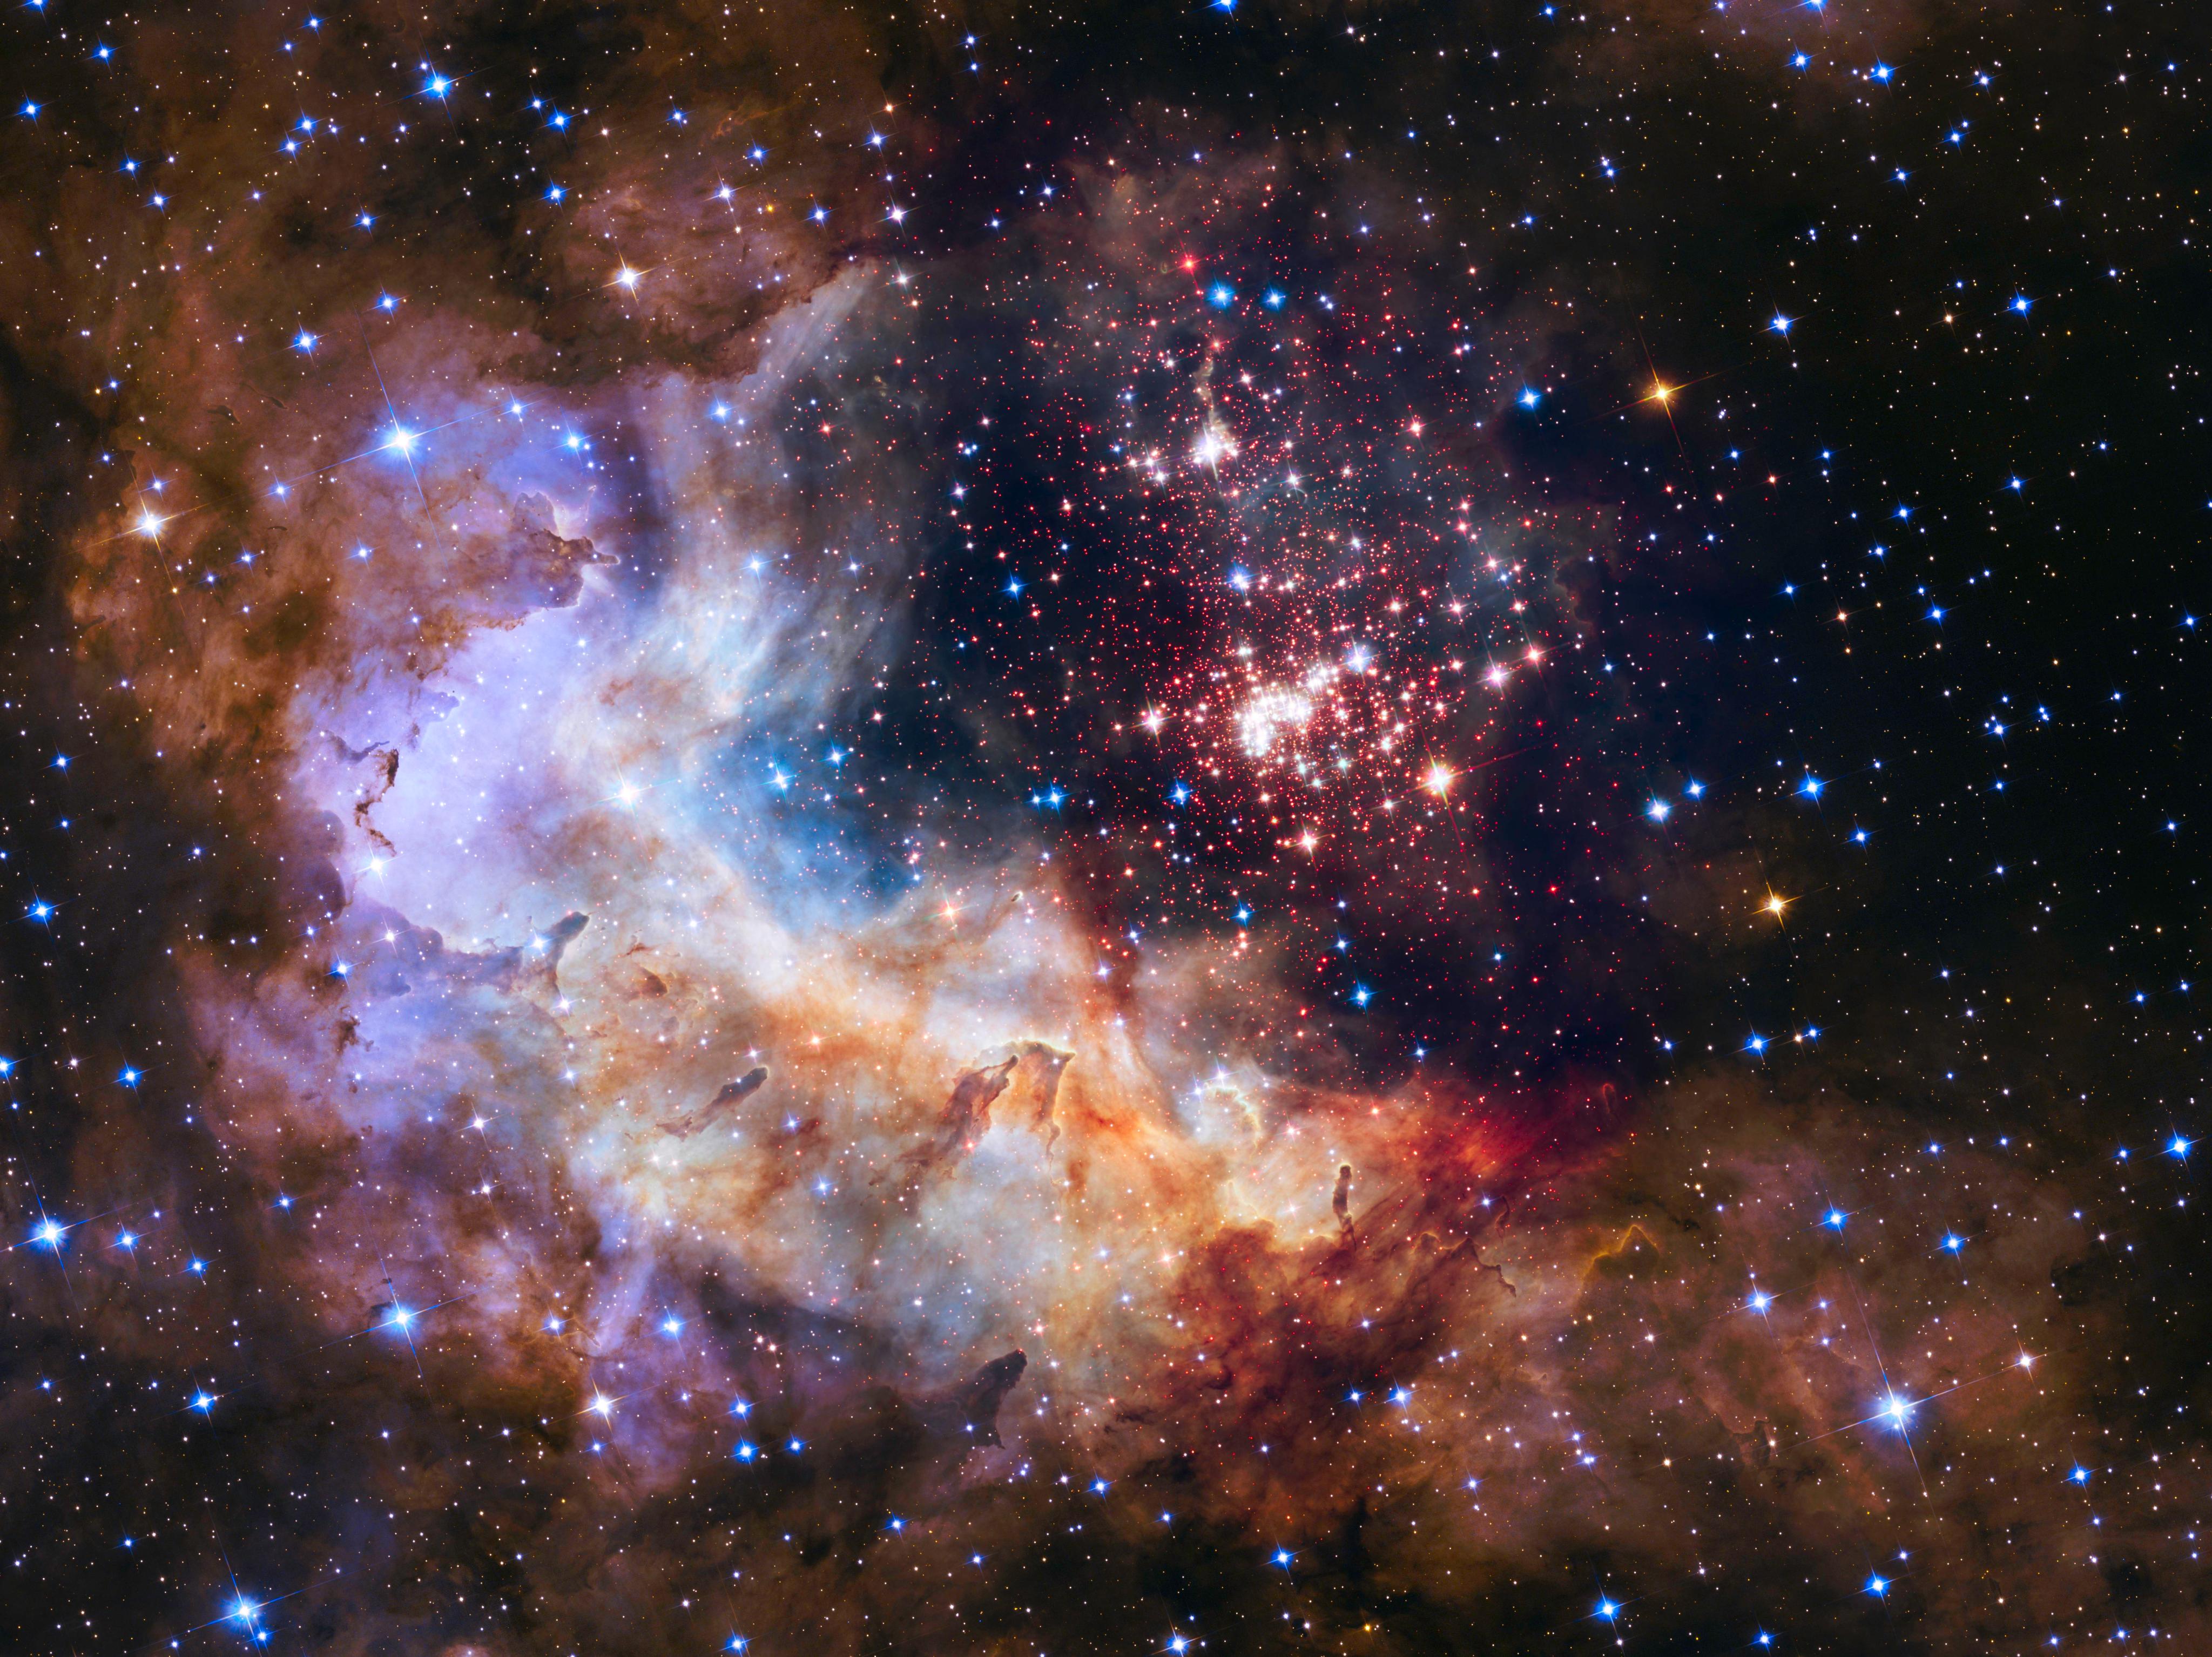 A combintation of yellow, brown, red, and blue/violet colored gas intermixed with blue and yellow stars.